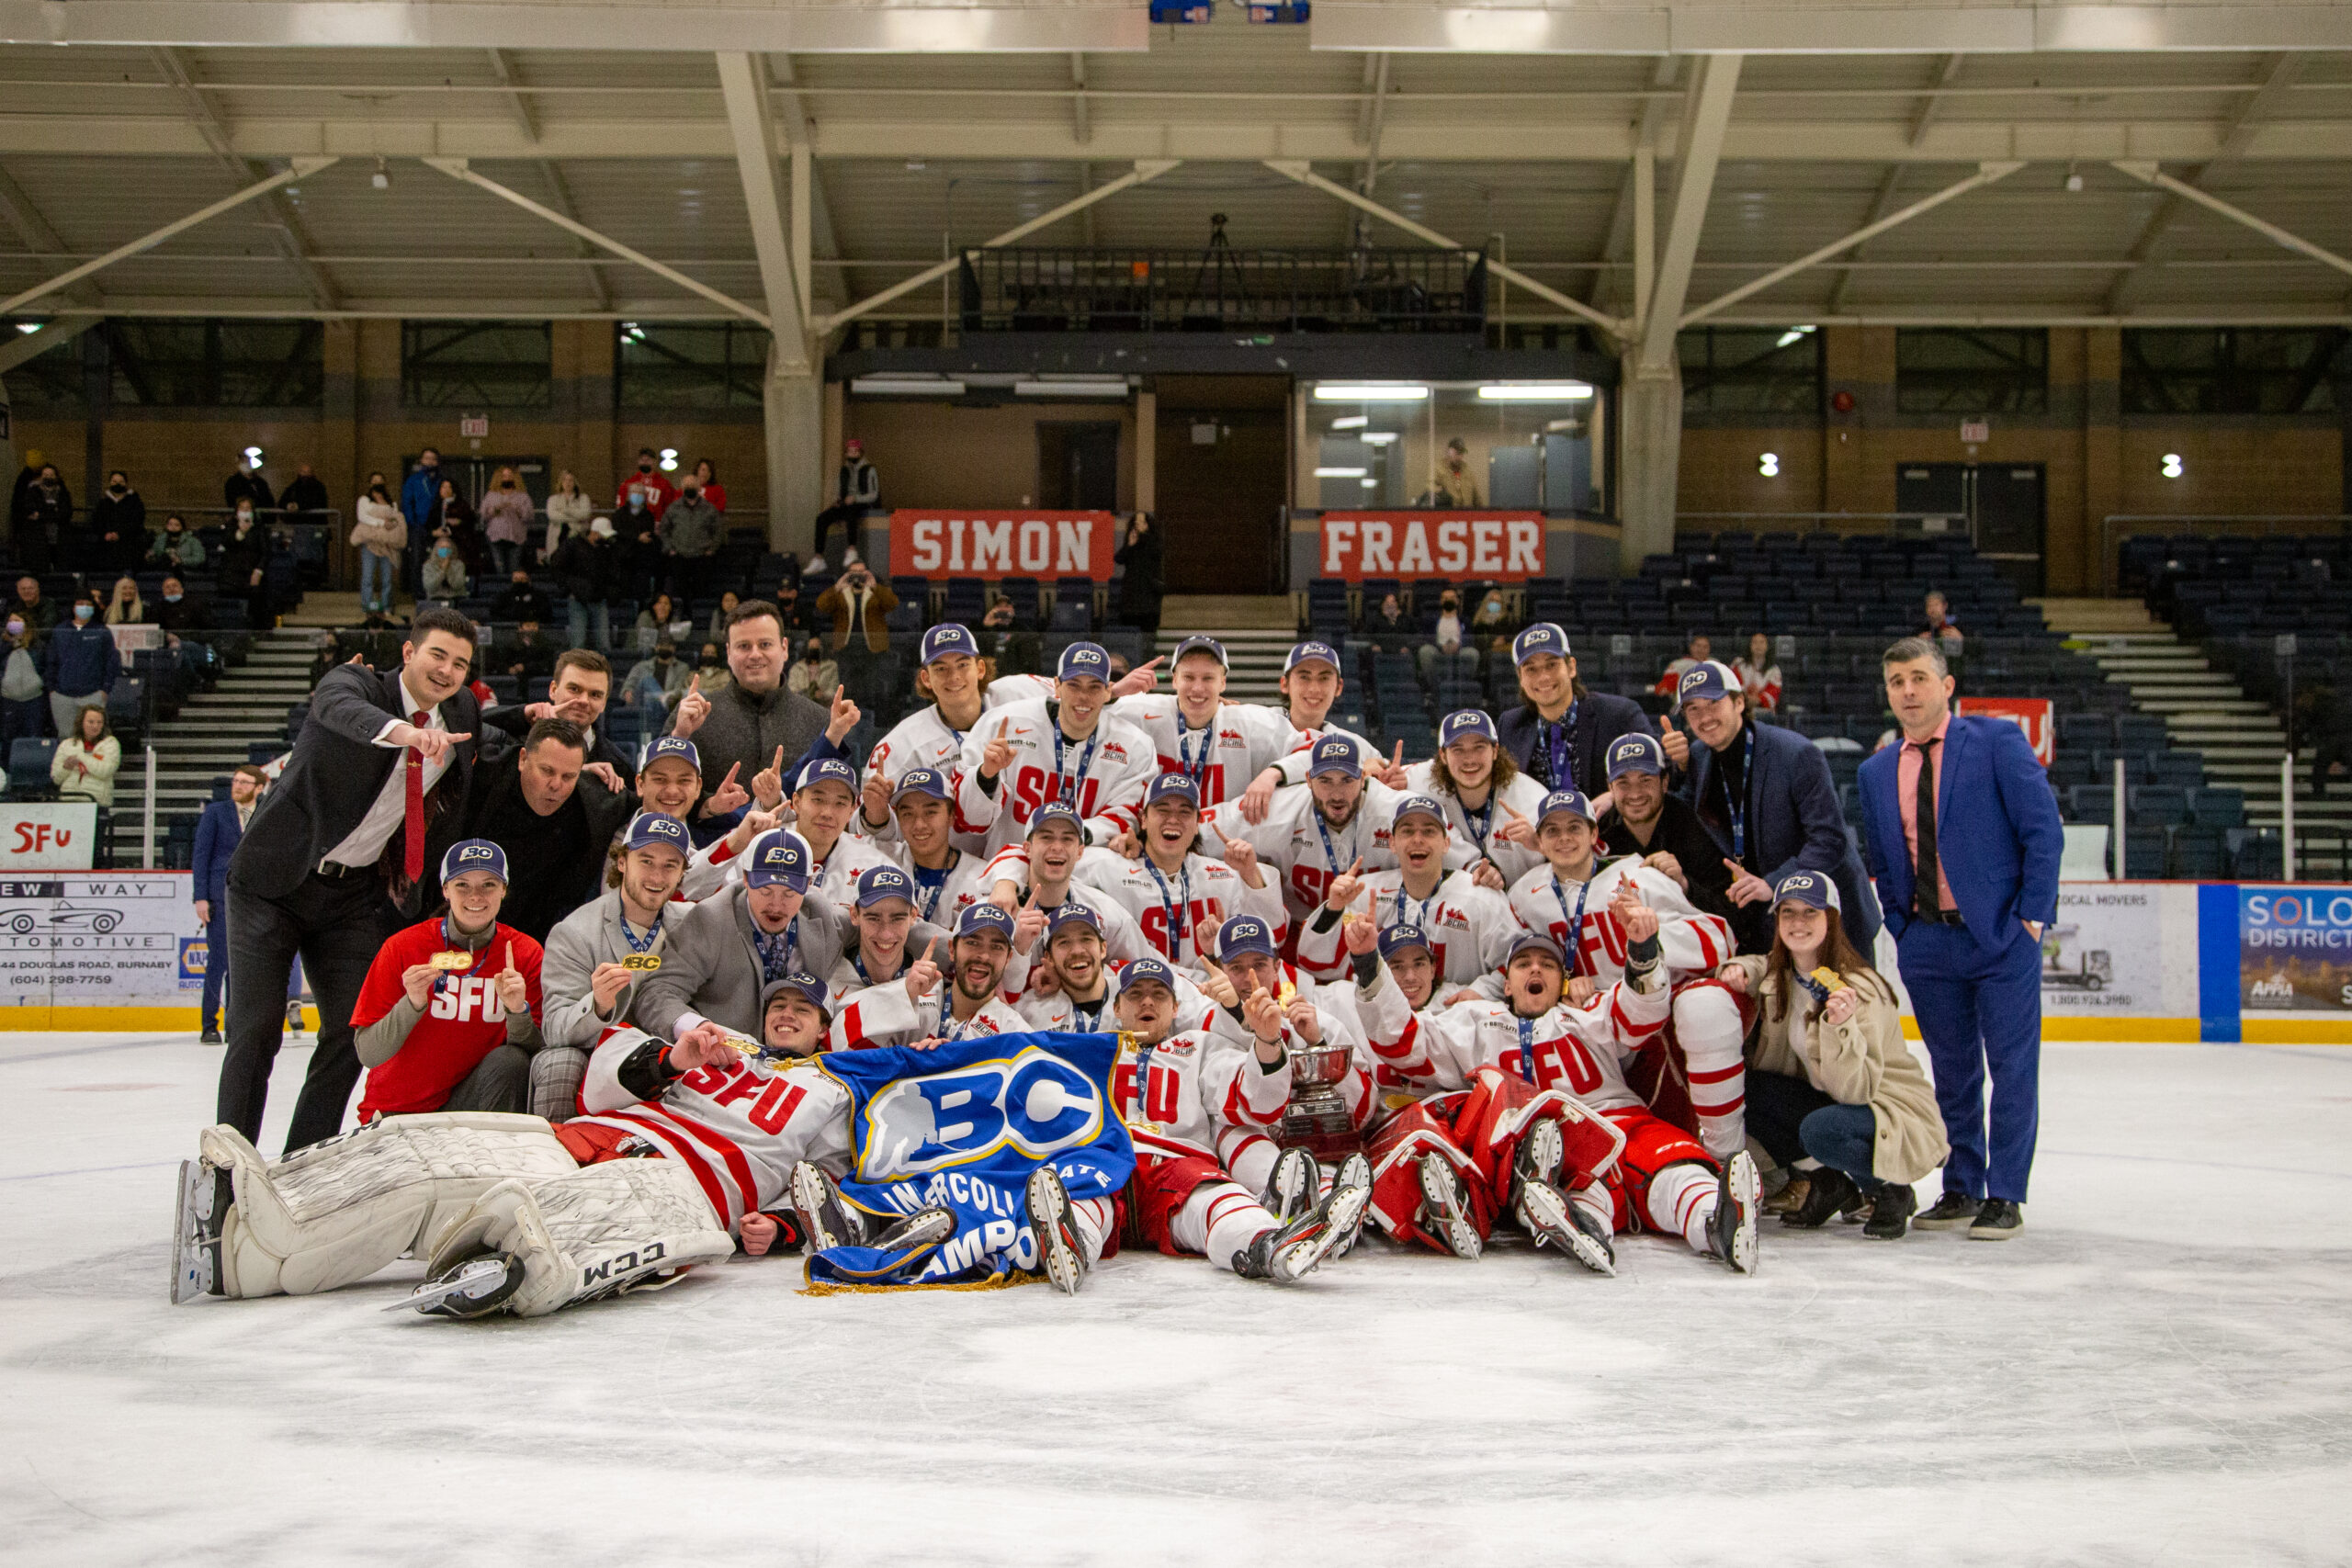 SFU posing on the ice with the Championship after the game